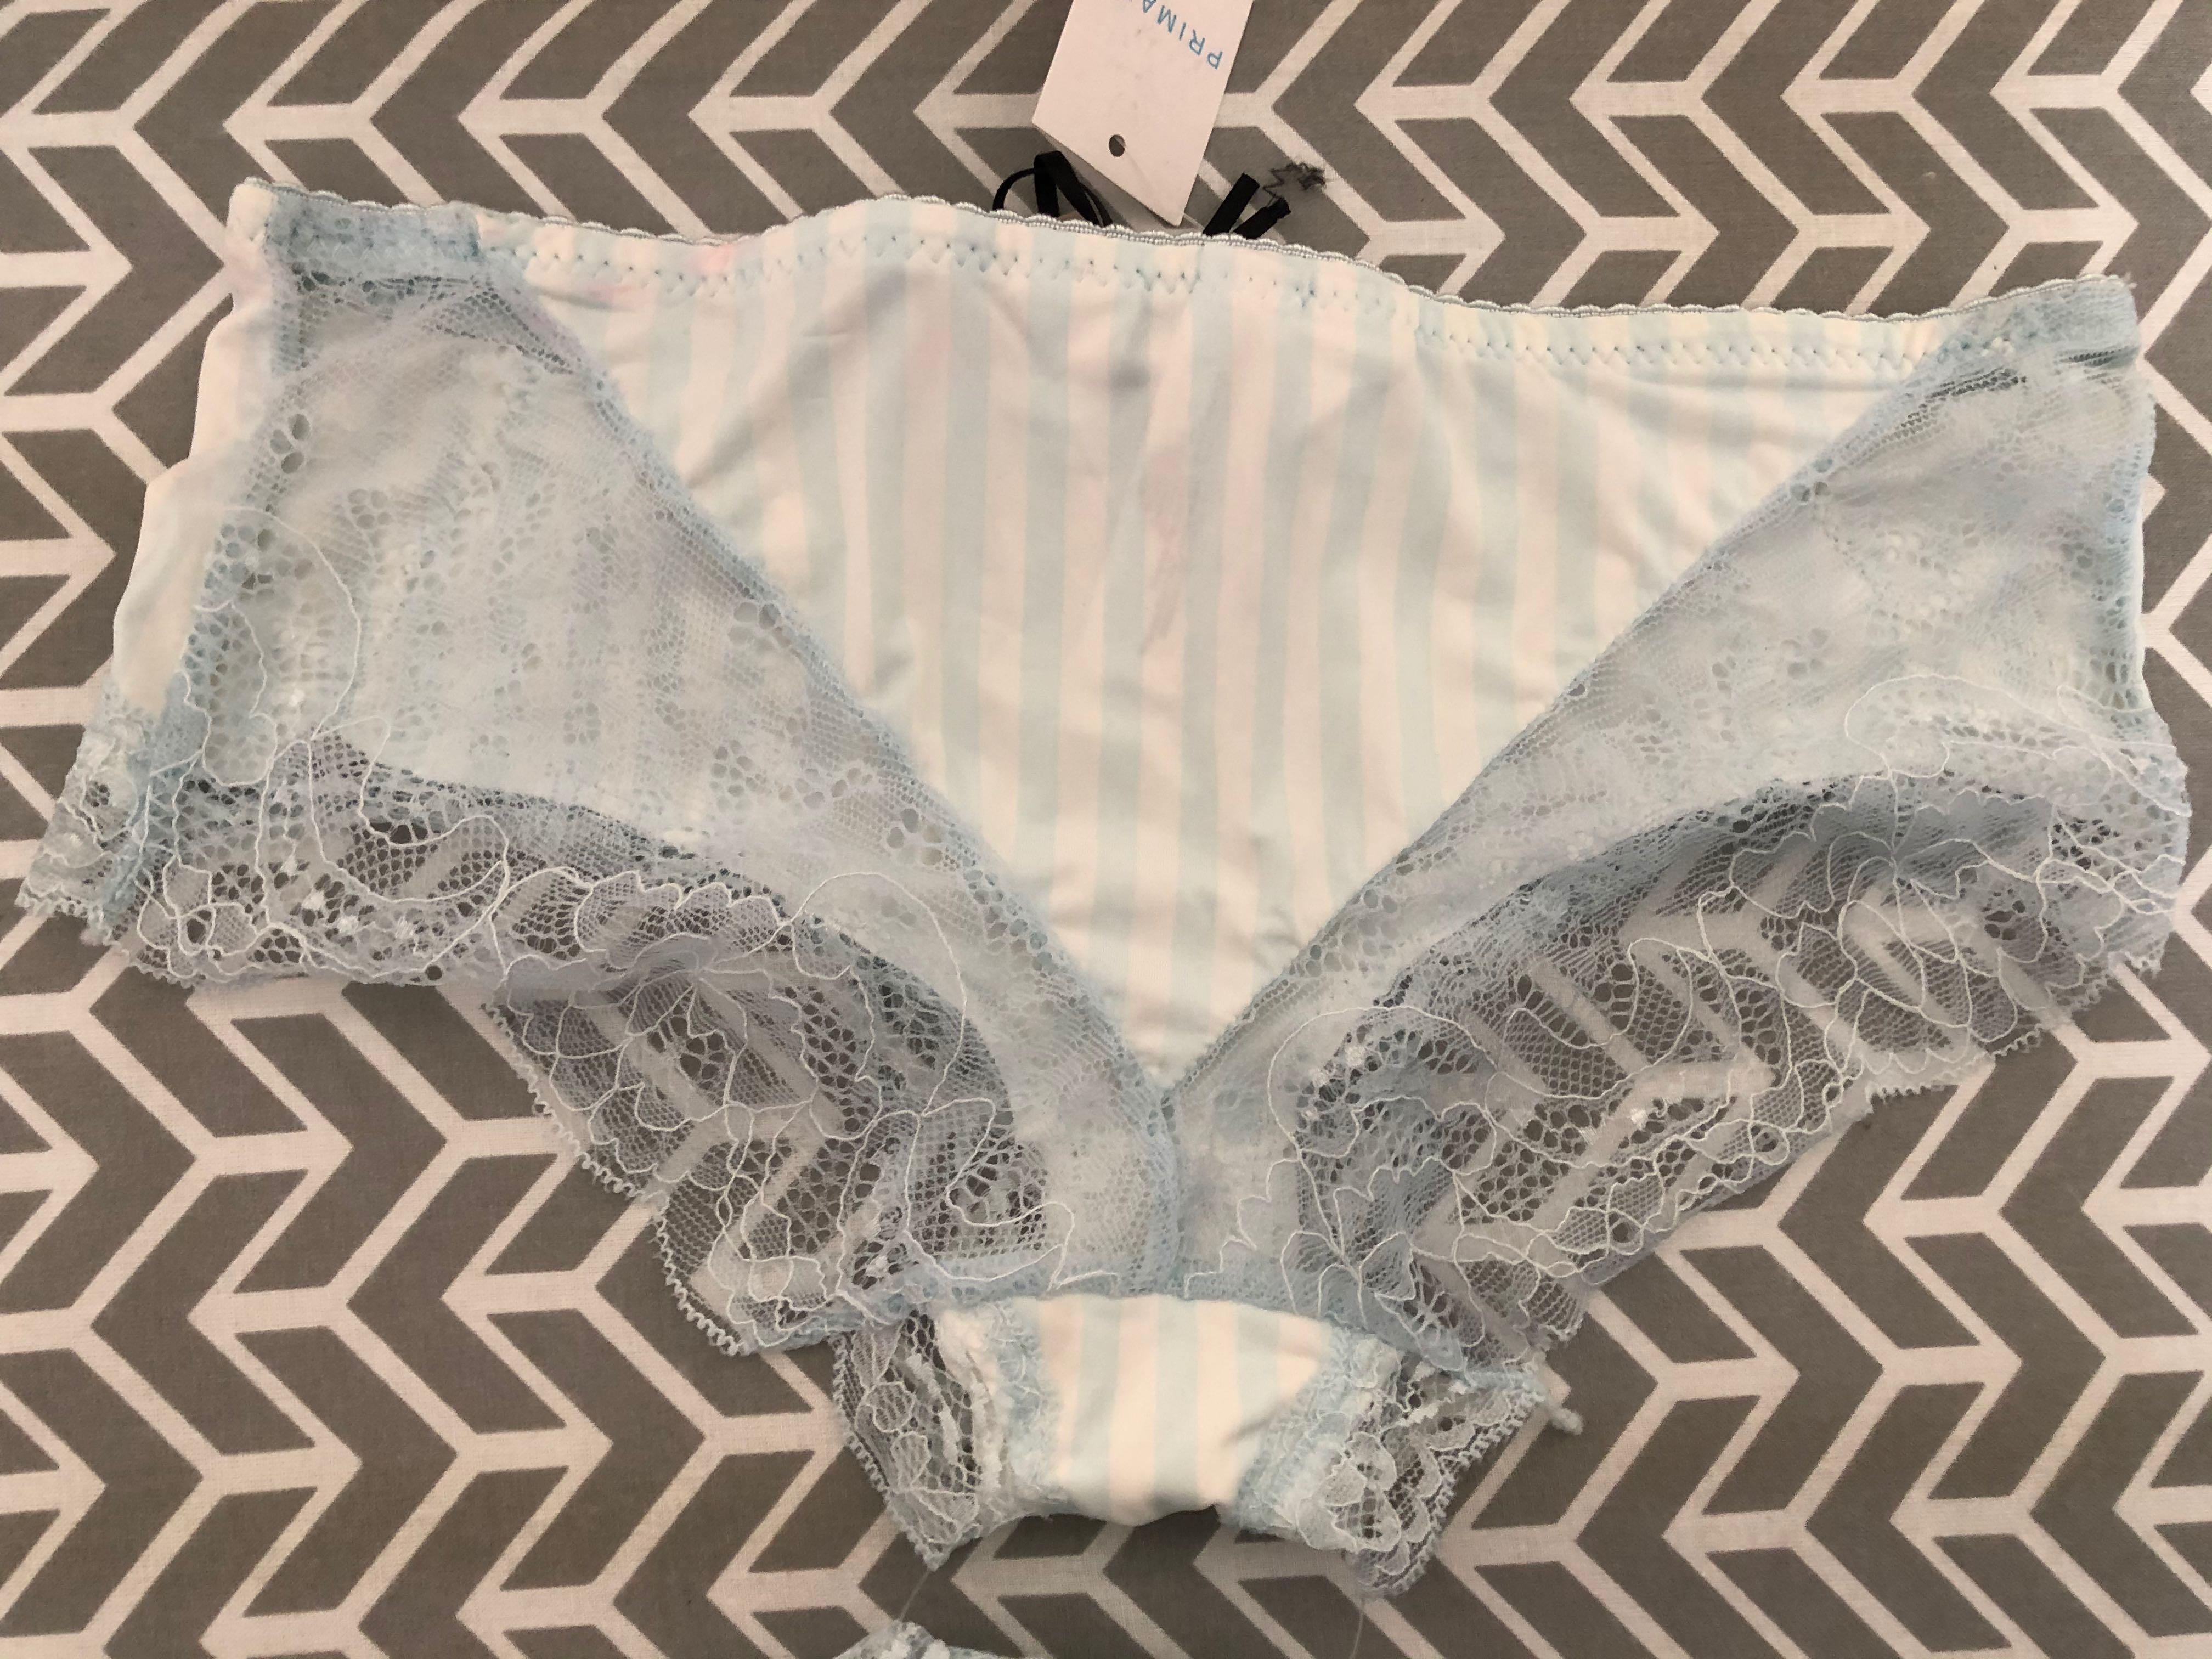 https://media.karousell.com/media/photos/products/2020/02/06/primark_sexy_underwear_size_s_2pcs_new_with_tag_1580952596_db9398d5_progressive.jpg